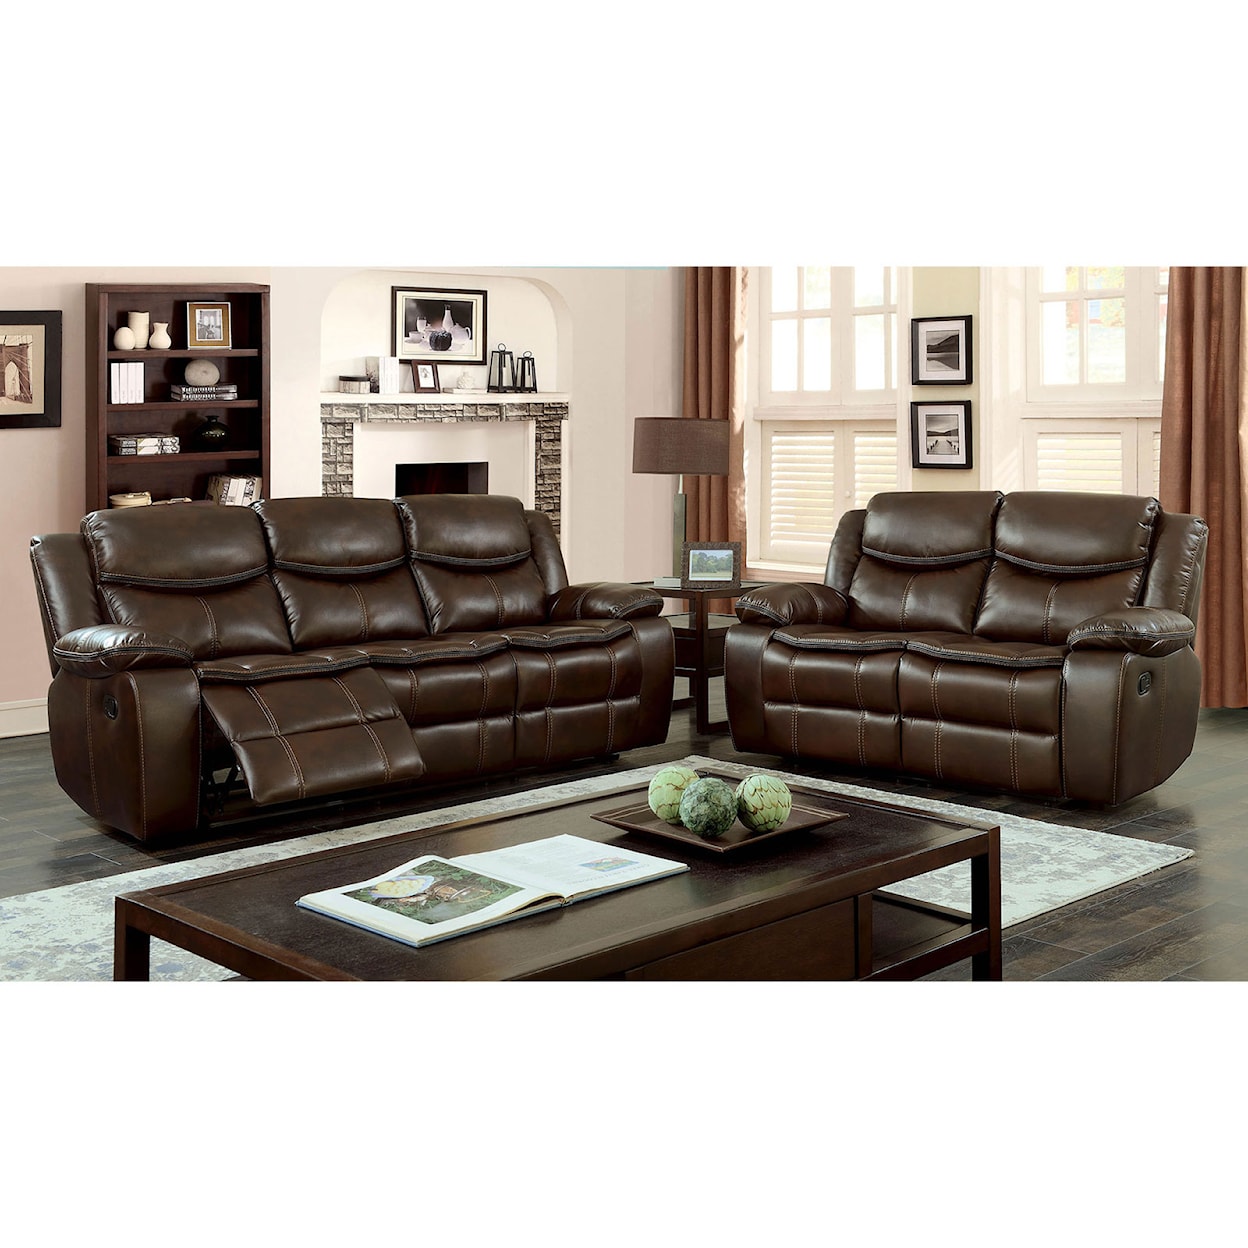 Furniture of America Pollux 3-Piece Living Room Set